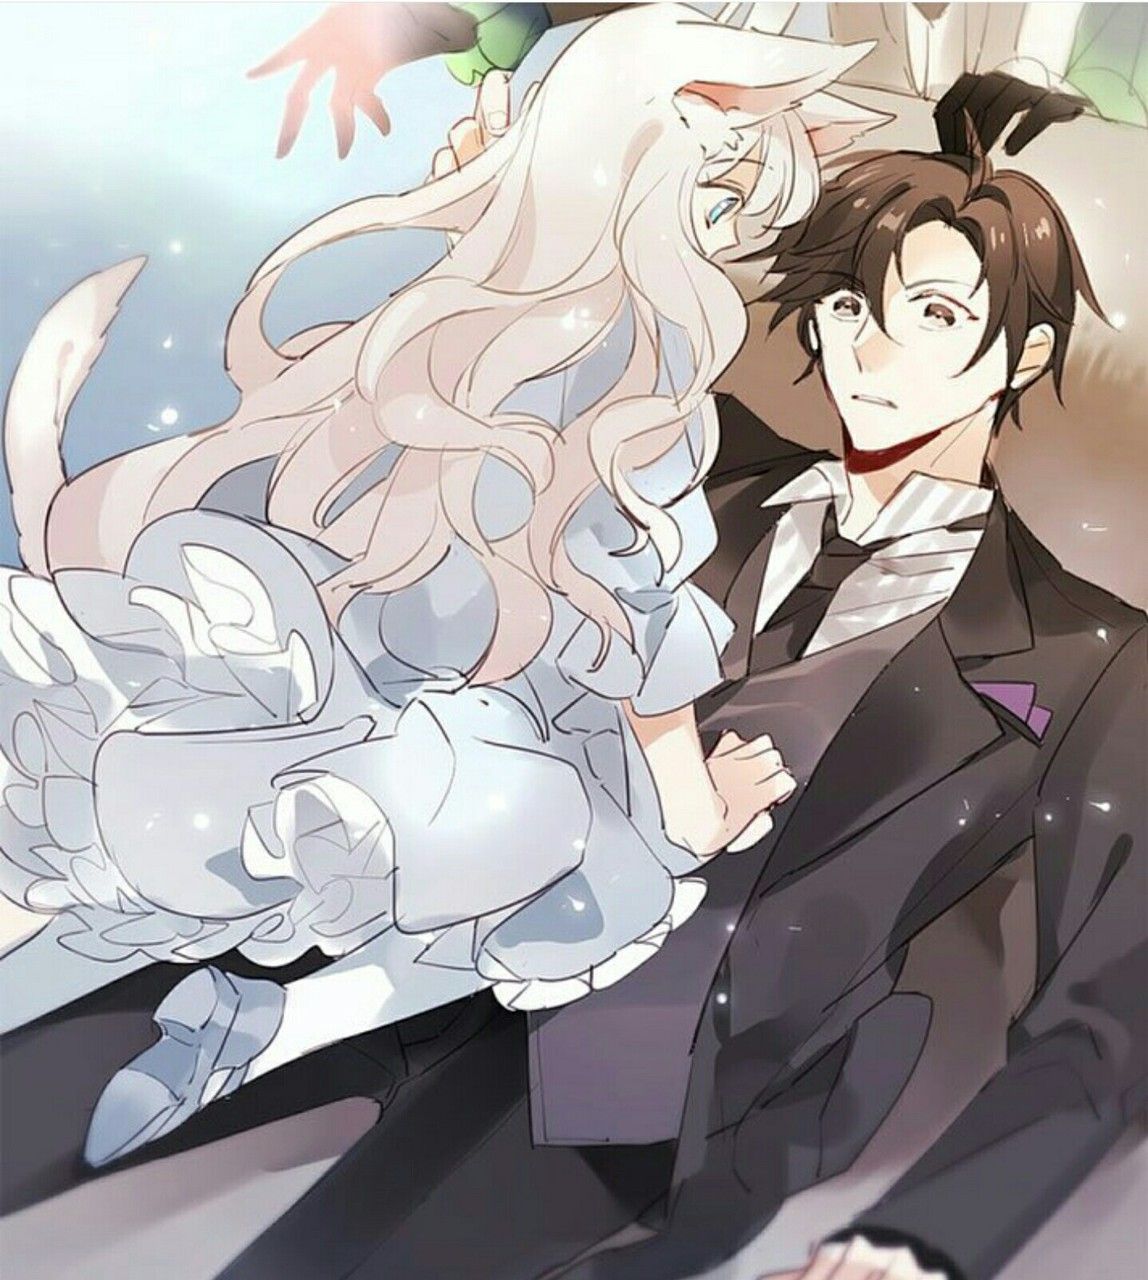 image about Daddy Jumin My Love <3. See more about mystic messenger, jumin han and jumin